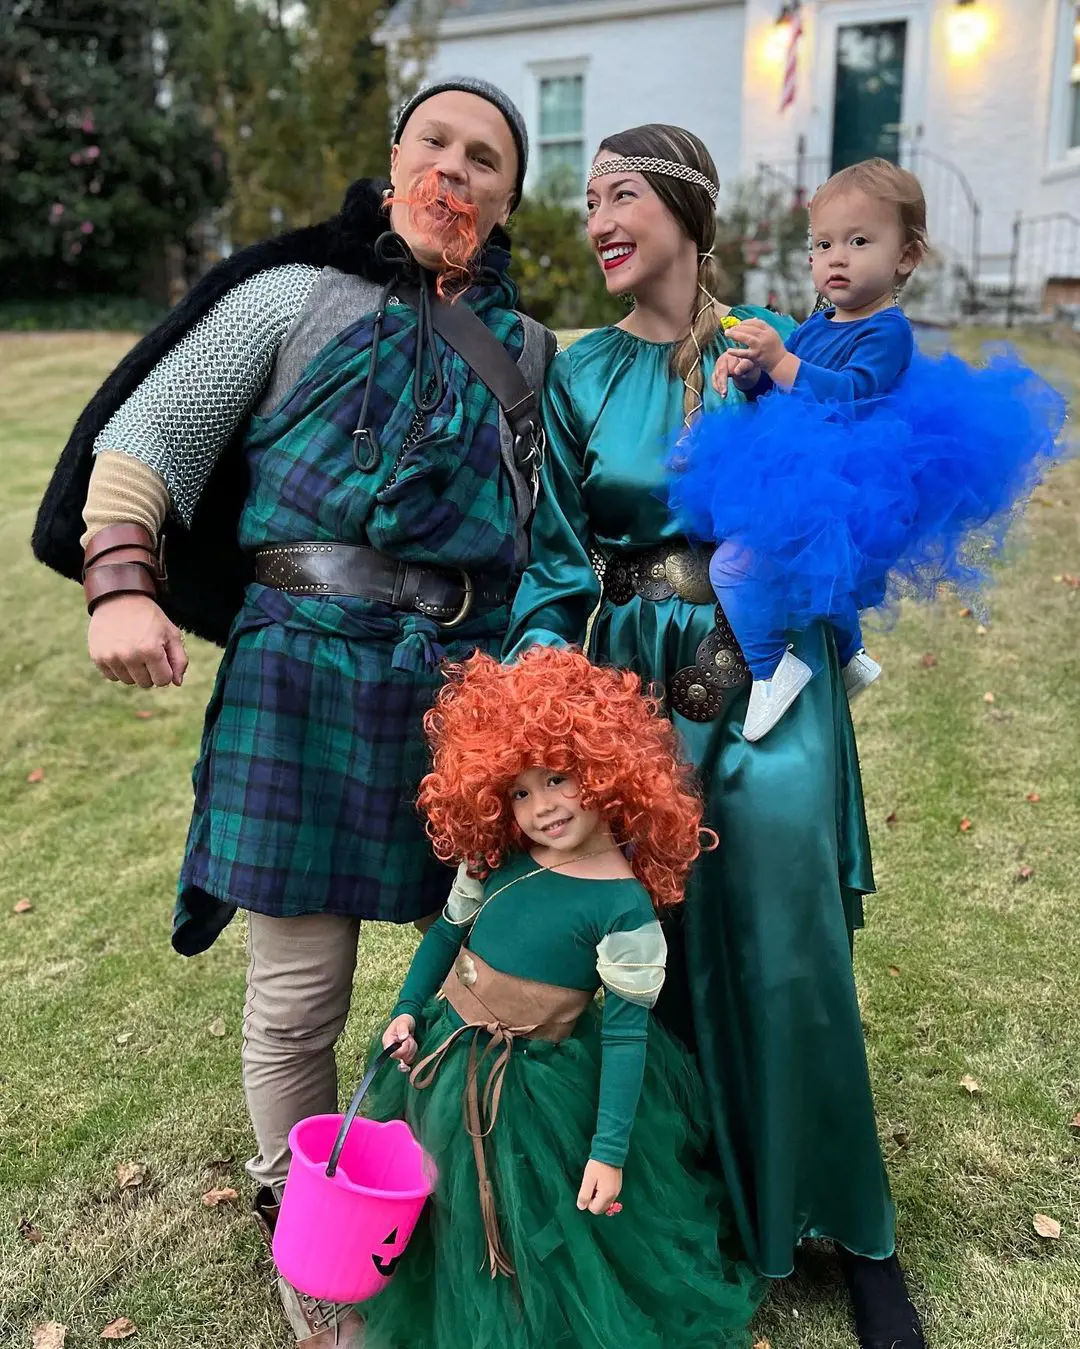 Coy celebrates Halloween with Claire, Wrenn and Ruby dressed up as King and Queen in October 2021